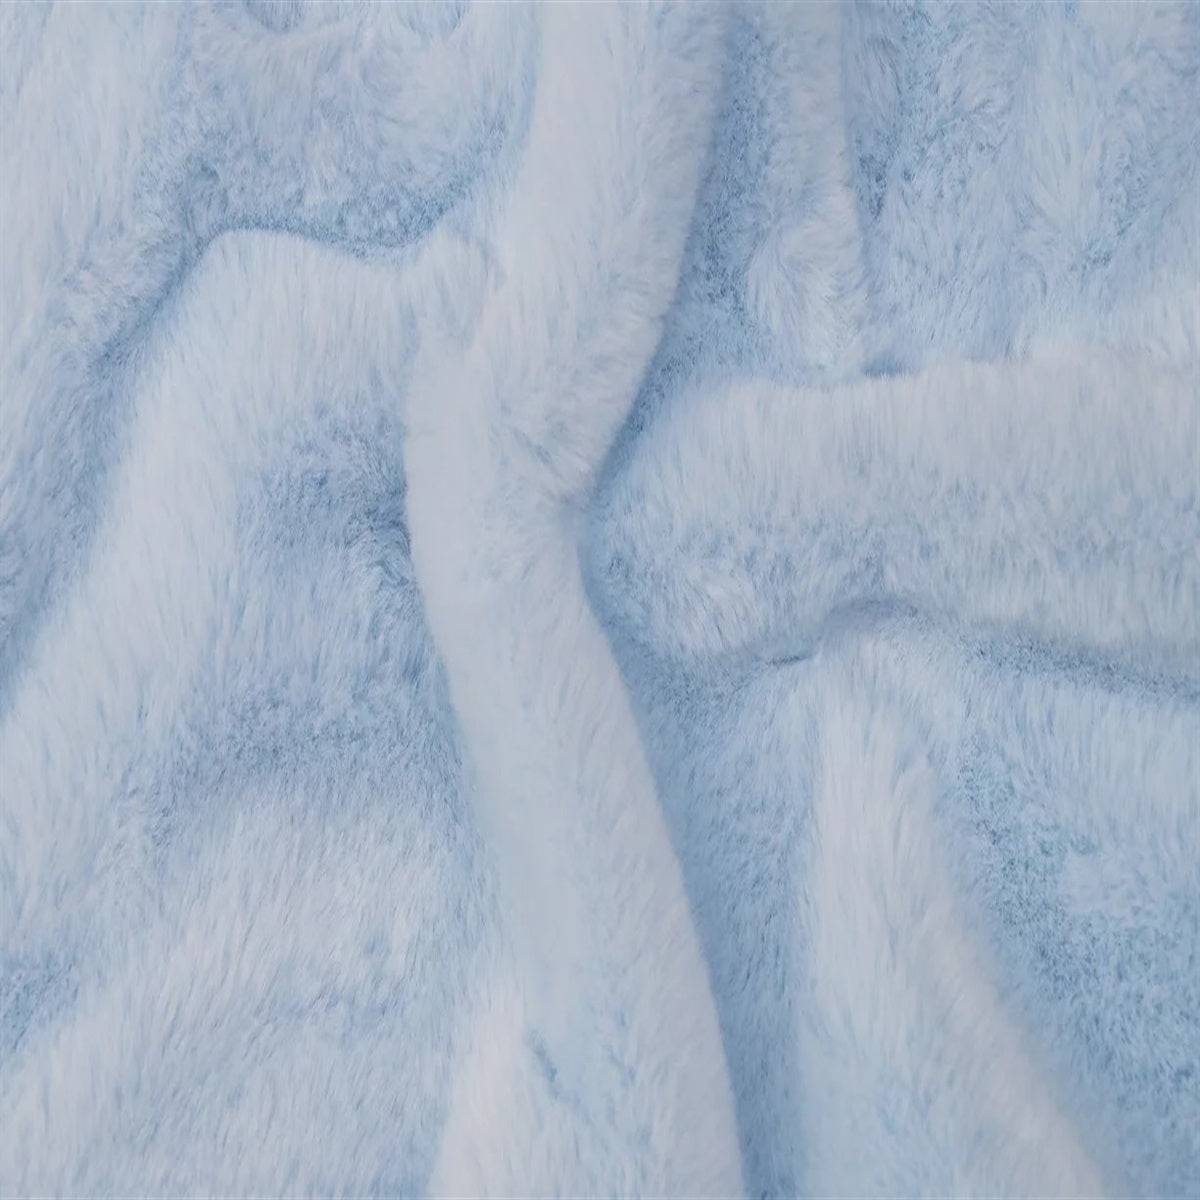 Bunny Thick Minky Fabric By The Roll (20 Yards)ICE FABRICSICE FABRICSBlueBy The Yard (60 inches Wide)Bunny Thick Minky Fabric By The Roll (20 Yards) ICE FABRICS Blue